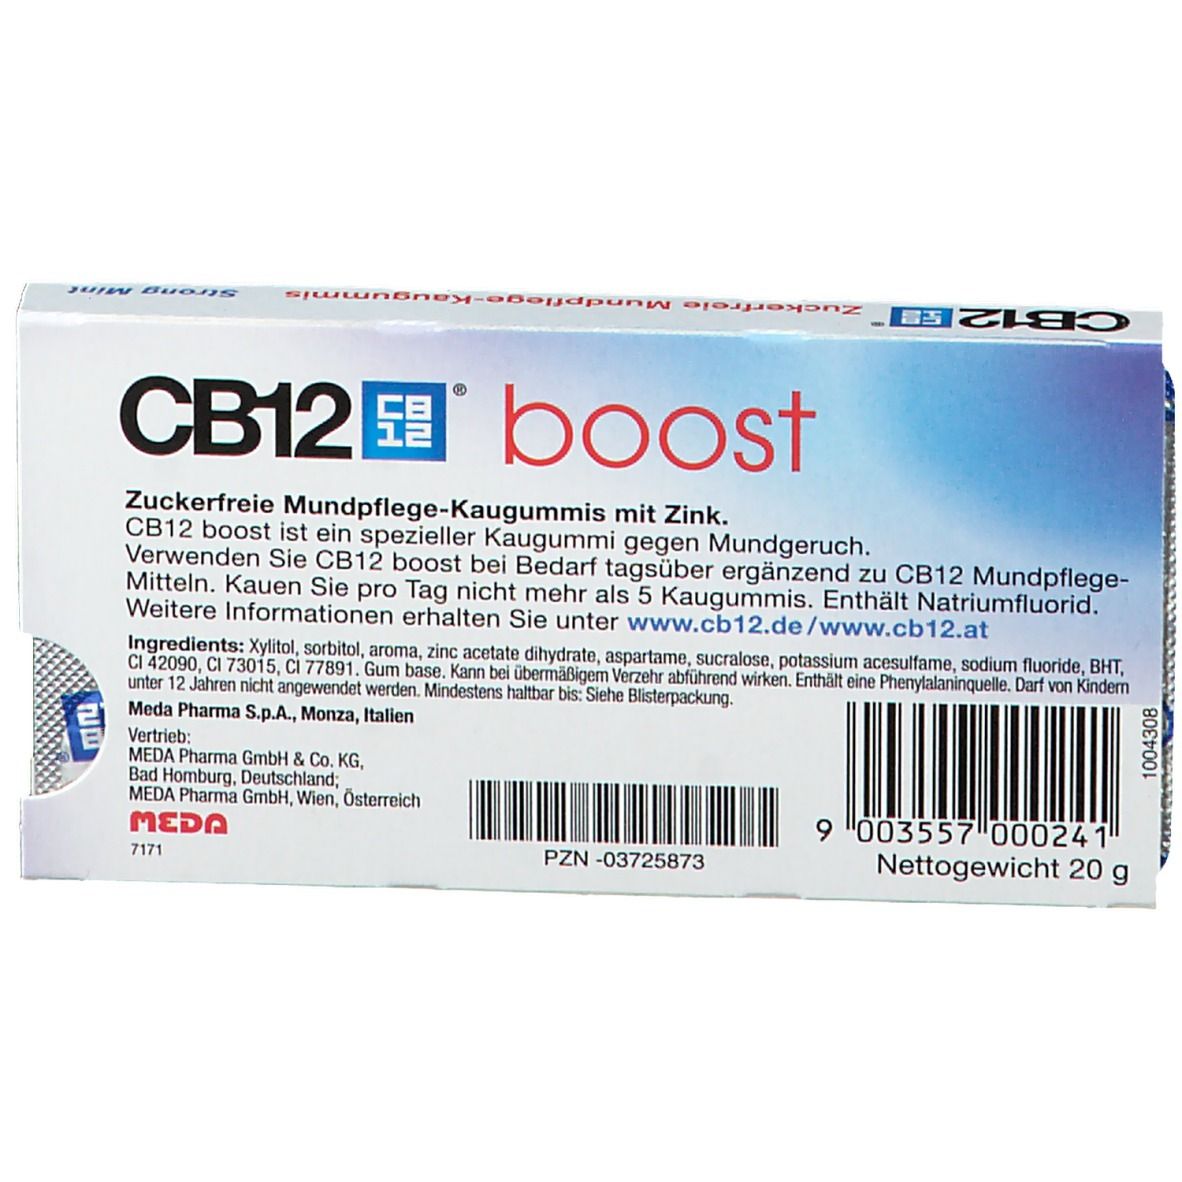 CB12 boost Strong Mint